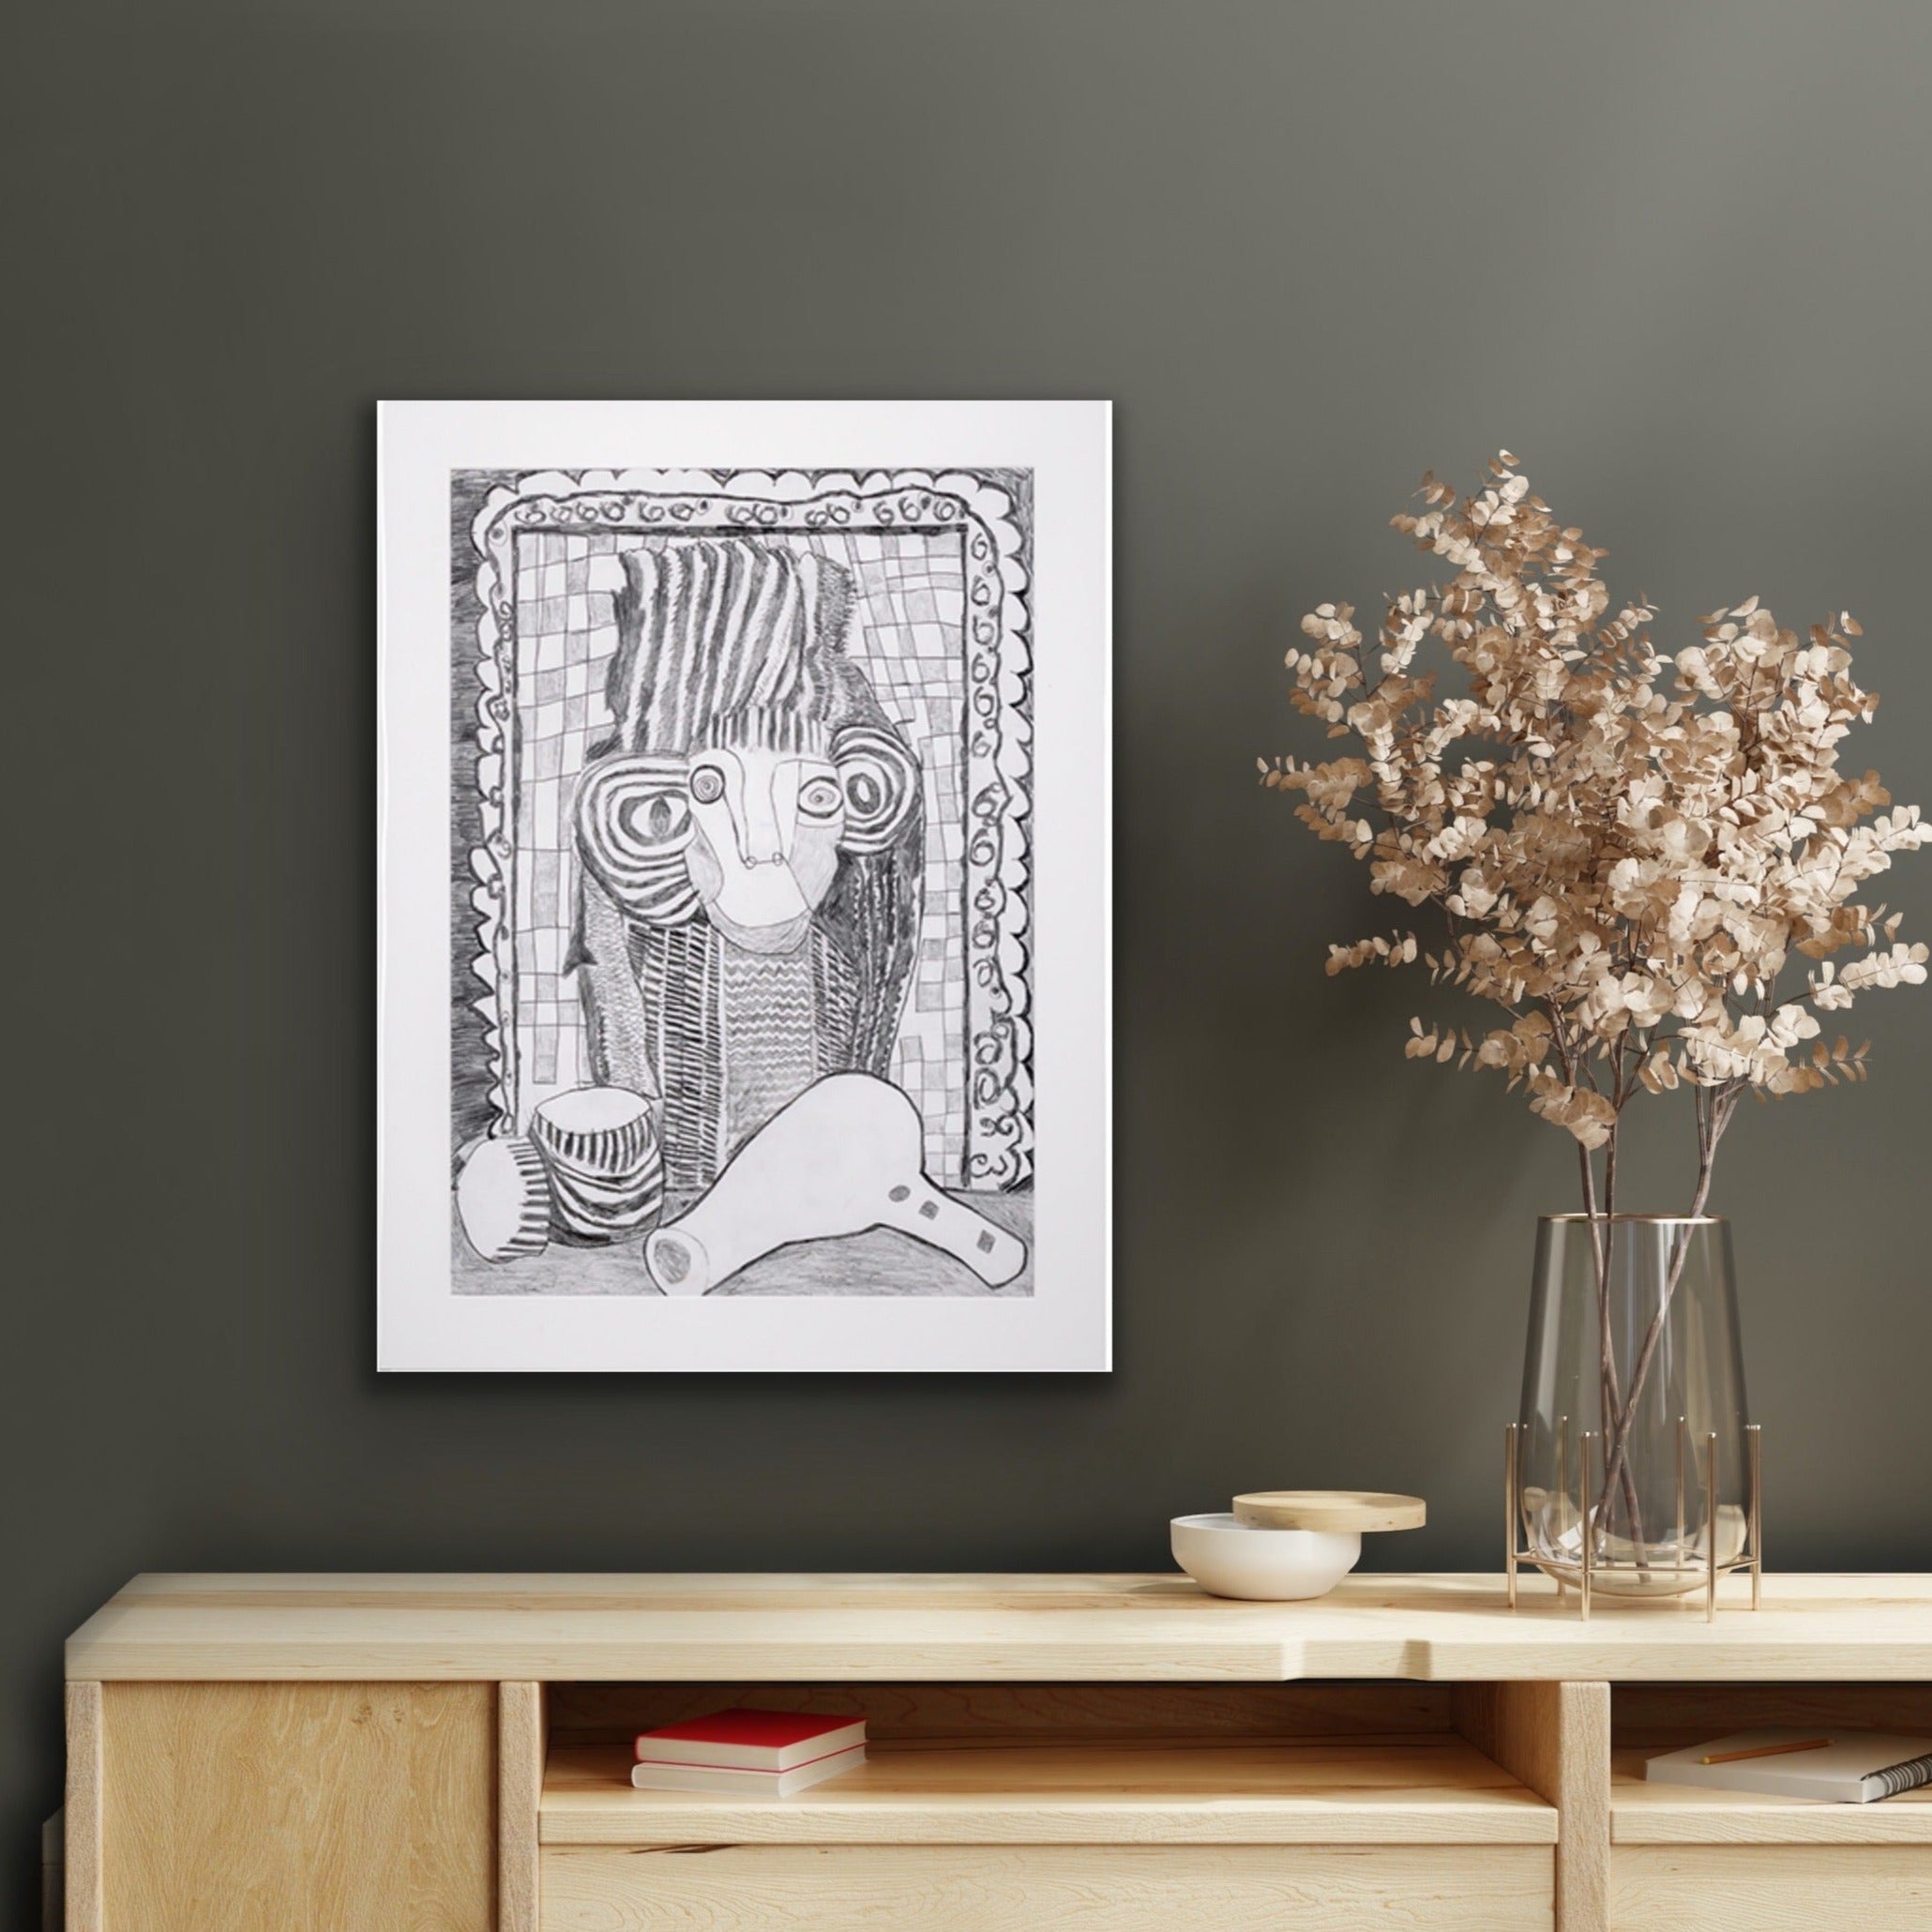 Hand drawn picture in pencil of a woman and a hair dryer called Francesca in situ 